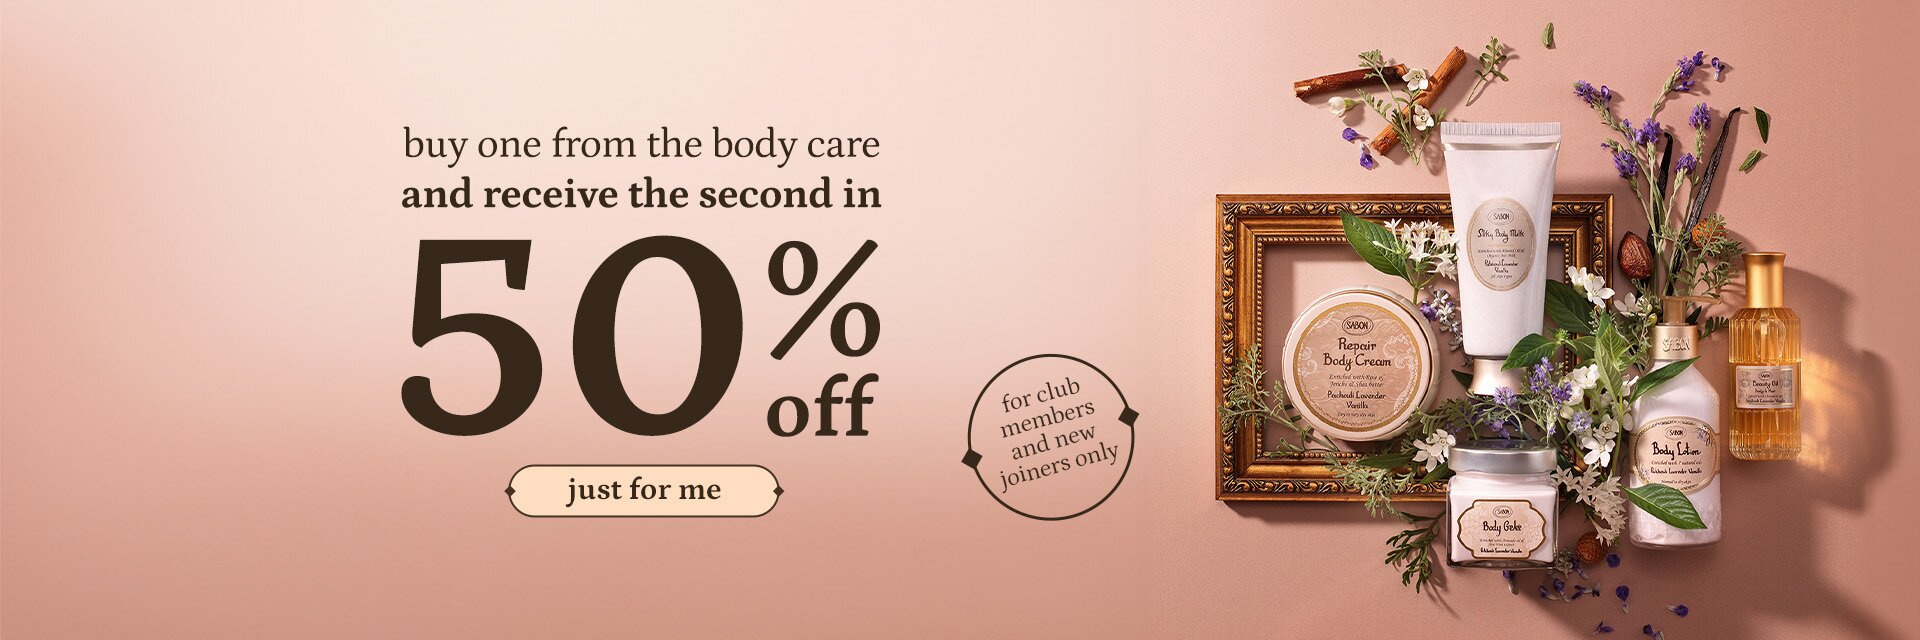 Buy one of the body moisturizing products and get a 50% OFF on the other, beyond the discount page: 